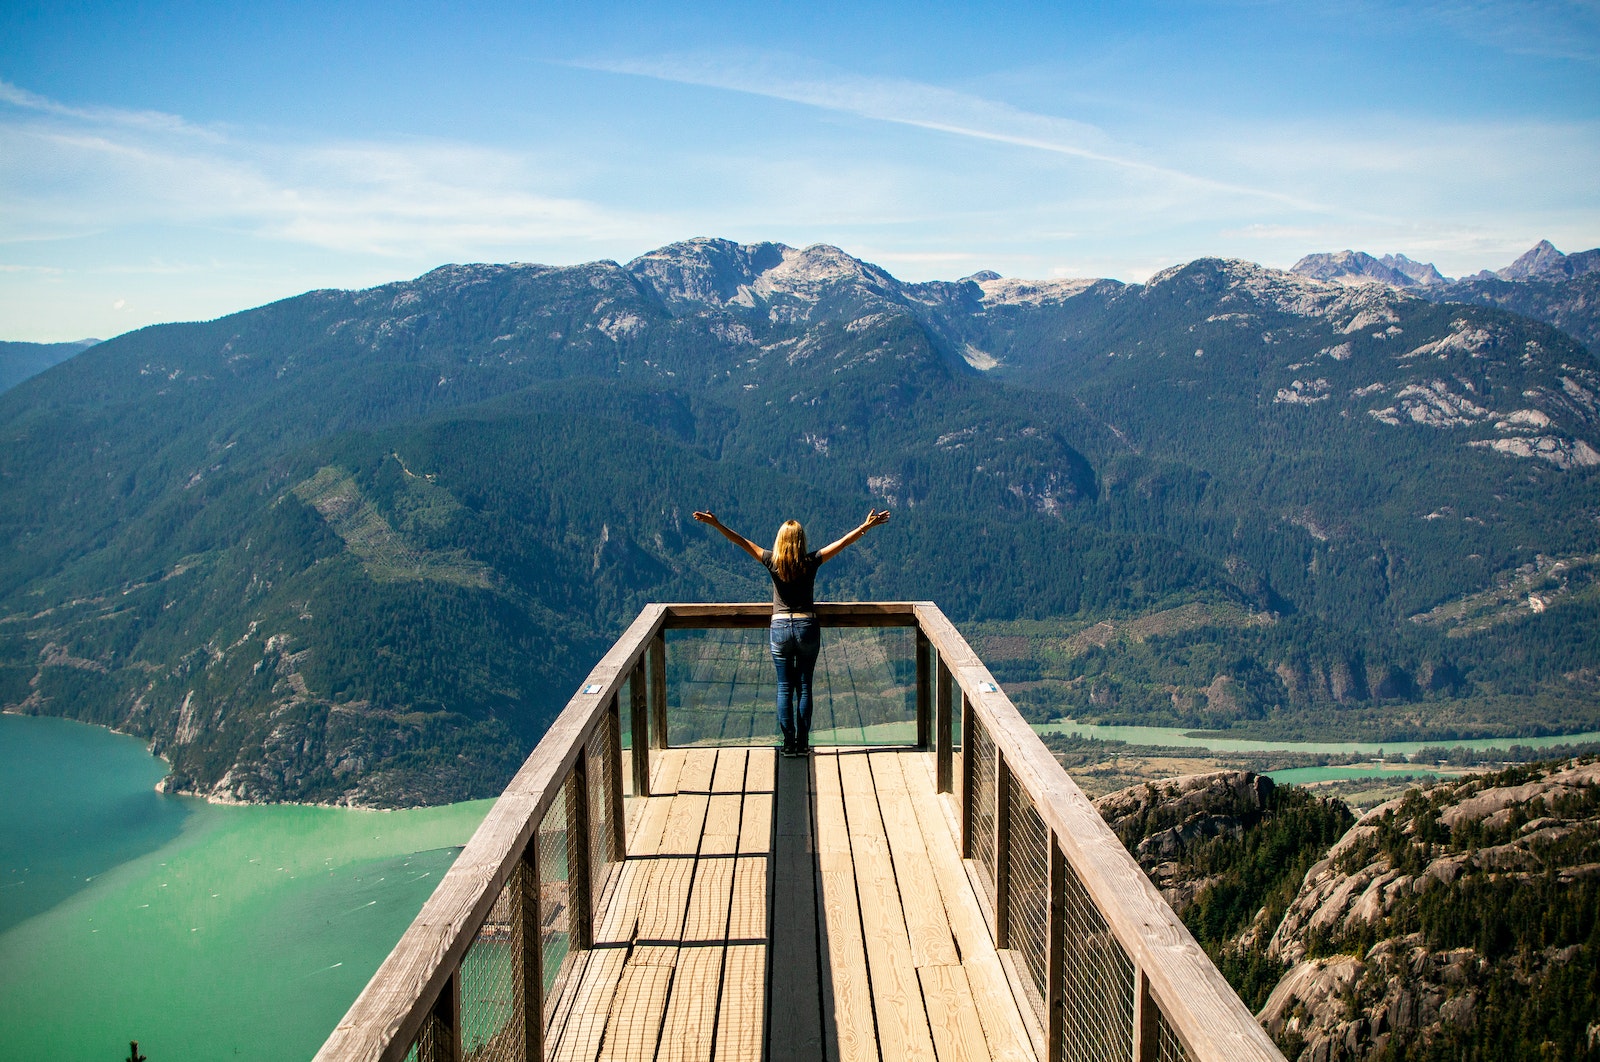 Person in Wooden Balcony Overlooking Mountains